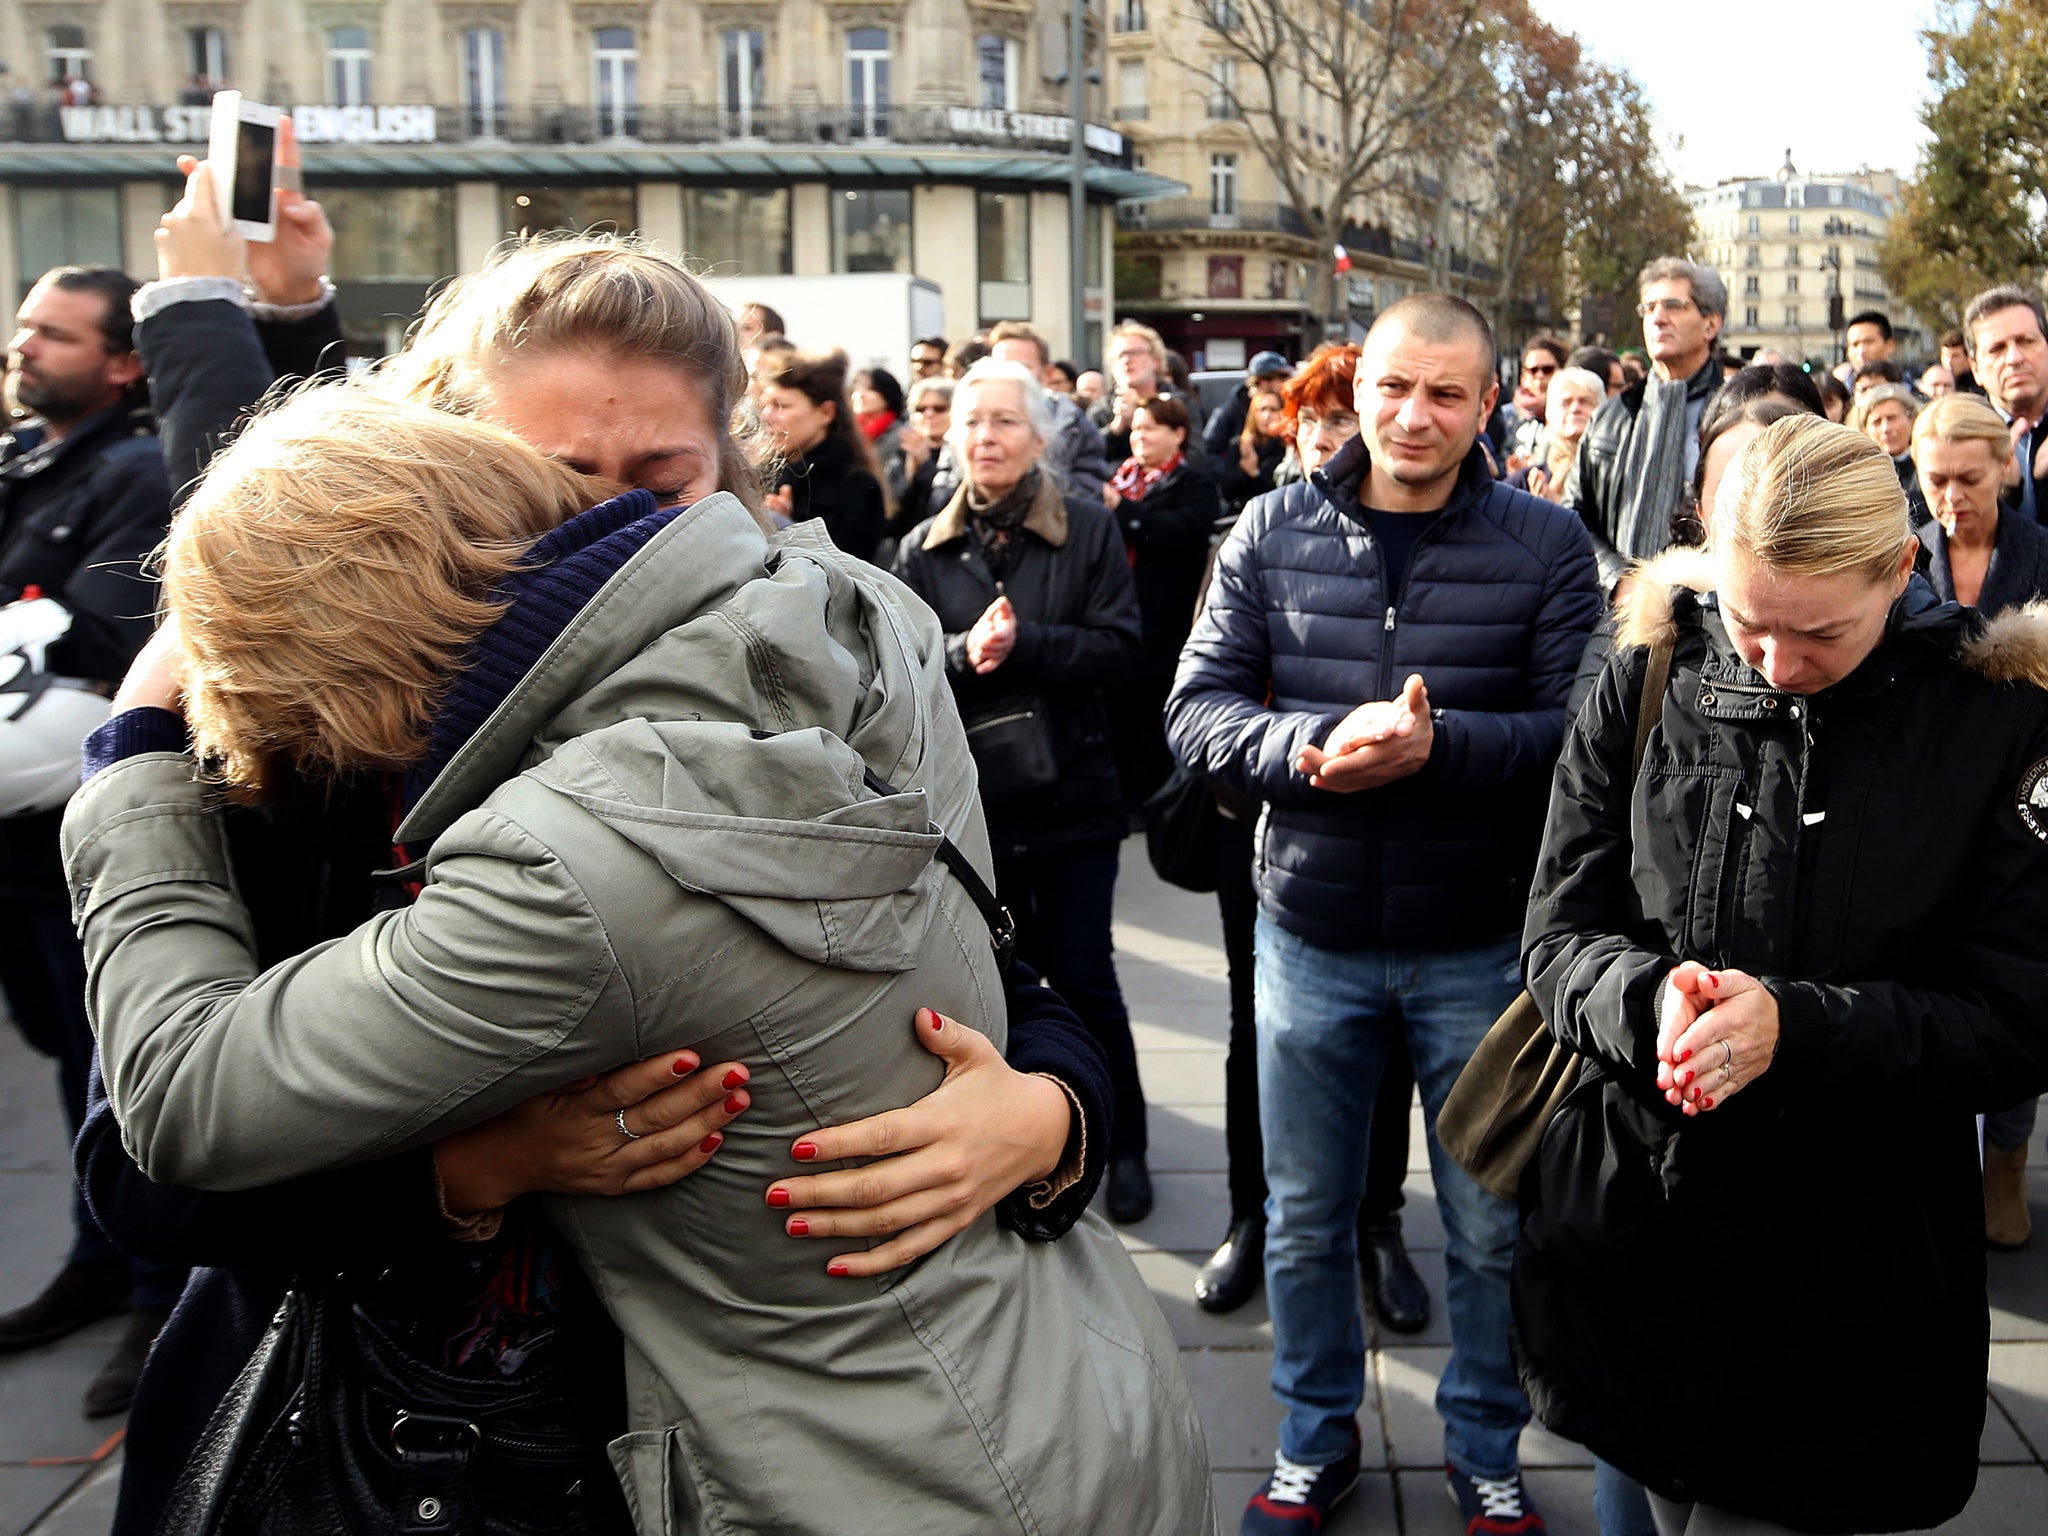 Crowds gather in the Place de la Republique, Paris, to observe a minute's silence across Europe to mark the victims of the attacks in the French capital